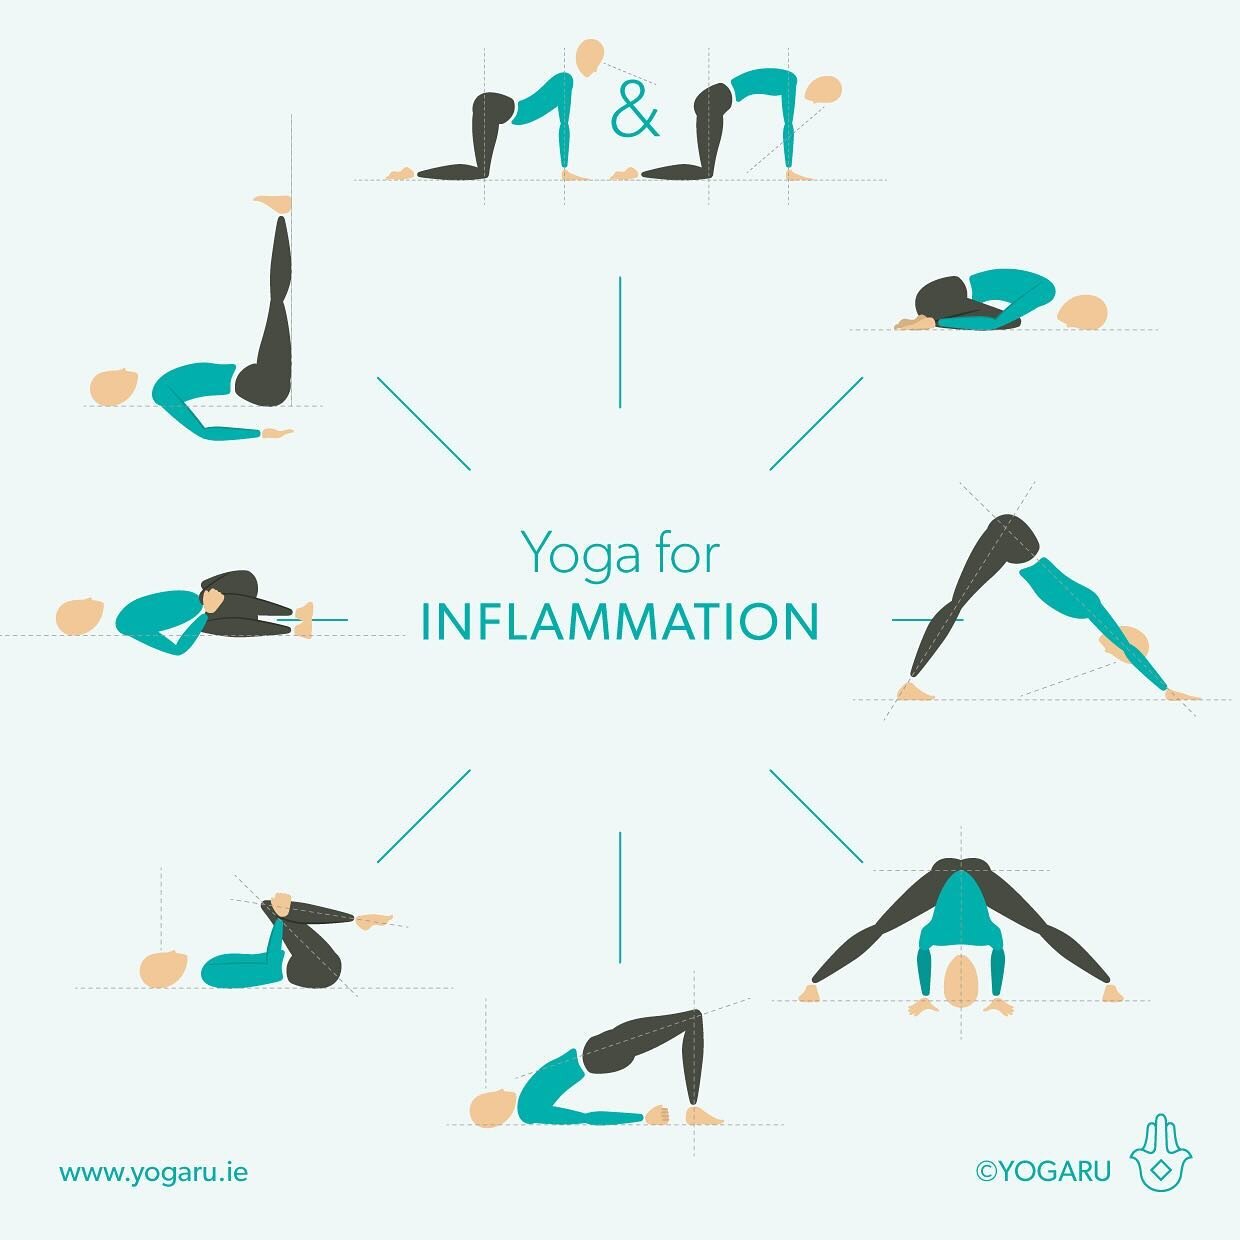 YOGA FOR INFLAMMATION. Yoga has many ways that it can reduce inflammation - it relieves stress, which is one of the main causes of inflammation, and boosts circulation which helps the lymphatic system to control inflammation. Try adding some of these